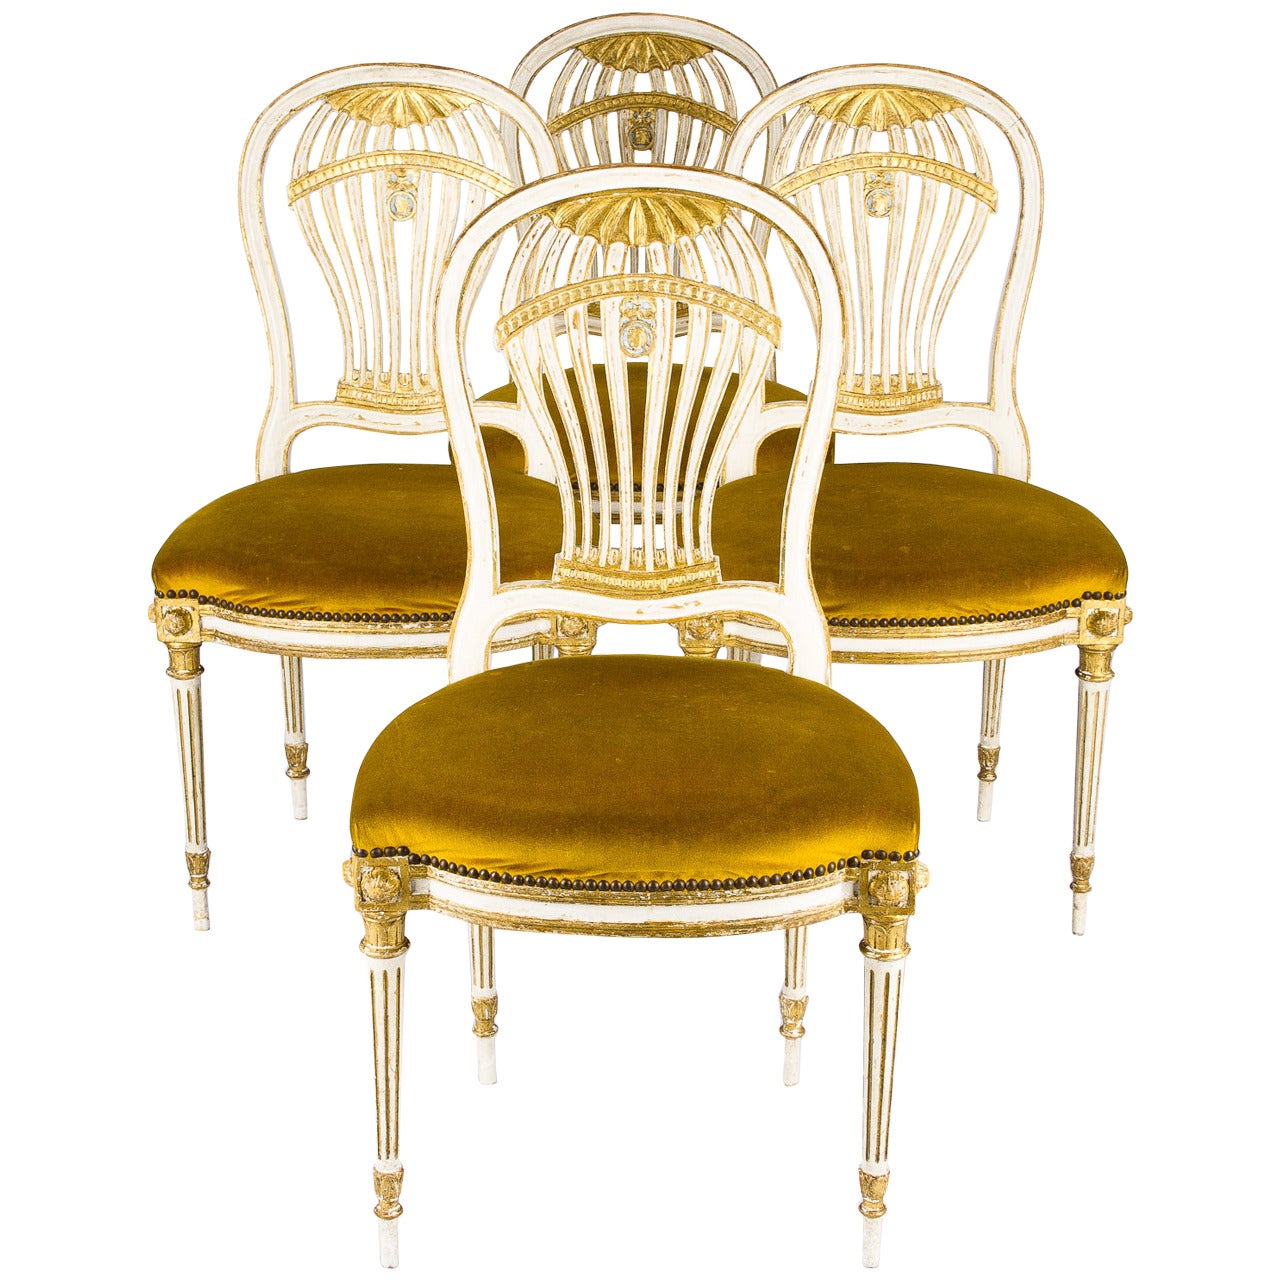 Set of 4 French Louis XVI Style "Montgolfiere" Chairs, circa 1920s